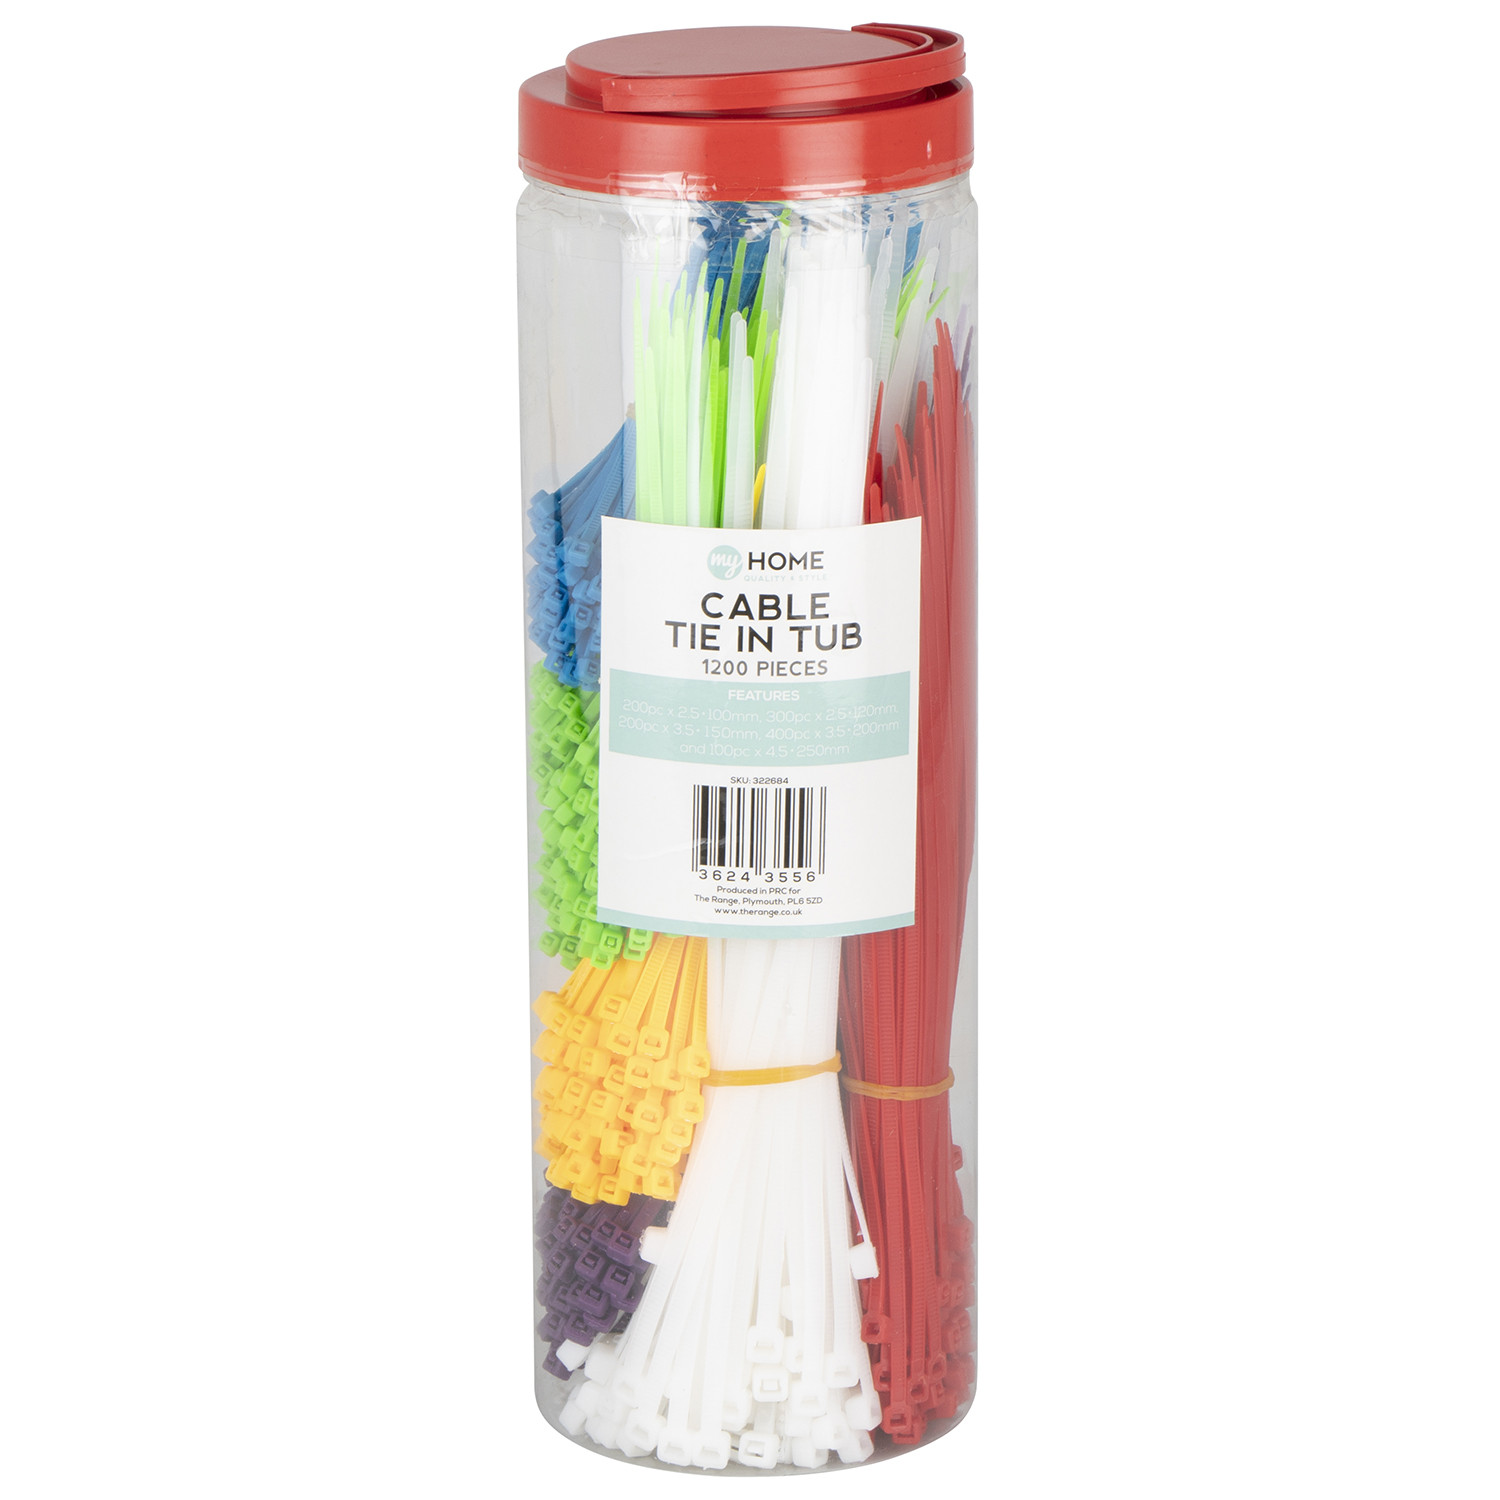 My Home Mixed Colours Cable Tie in Tub 1200 Pack Image